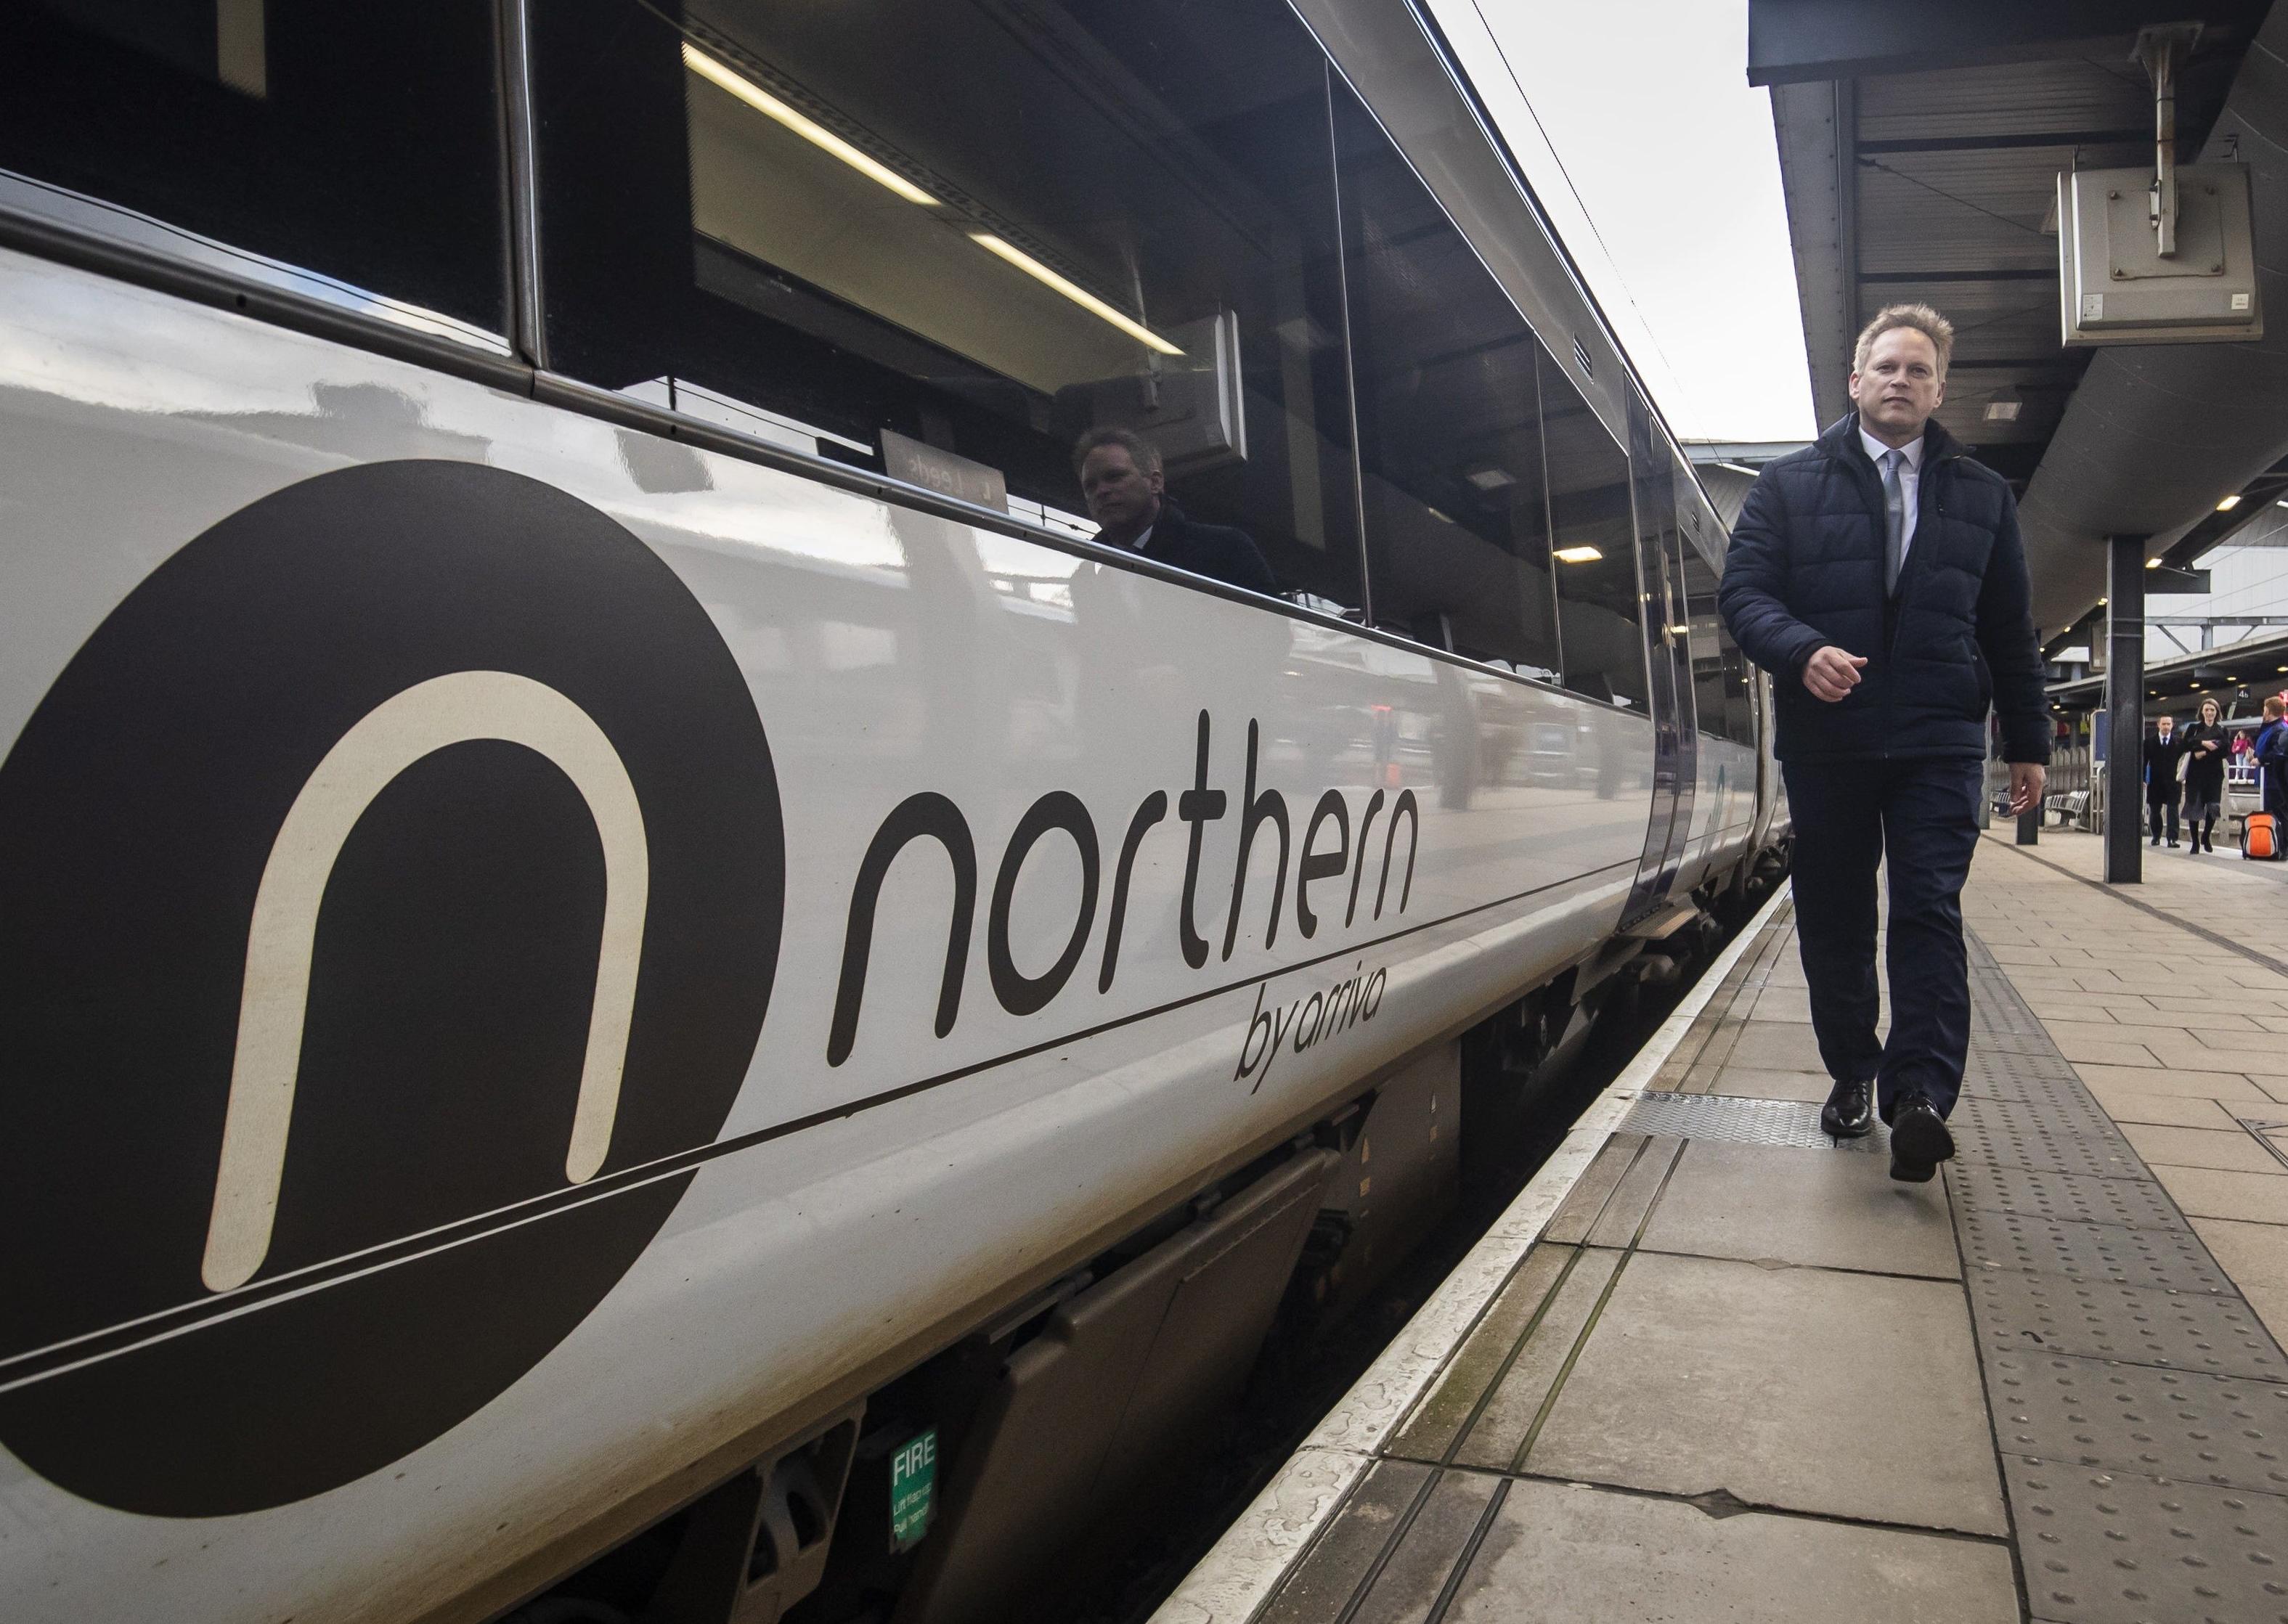 Transport Secretary Grant Shapps during a recent visit to Leeds.